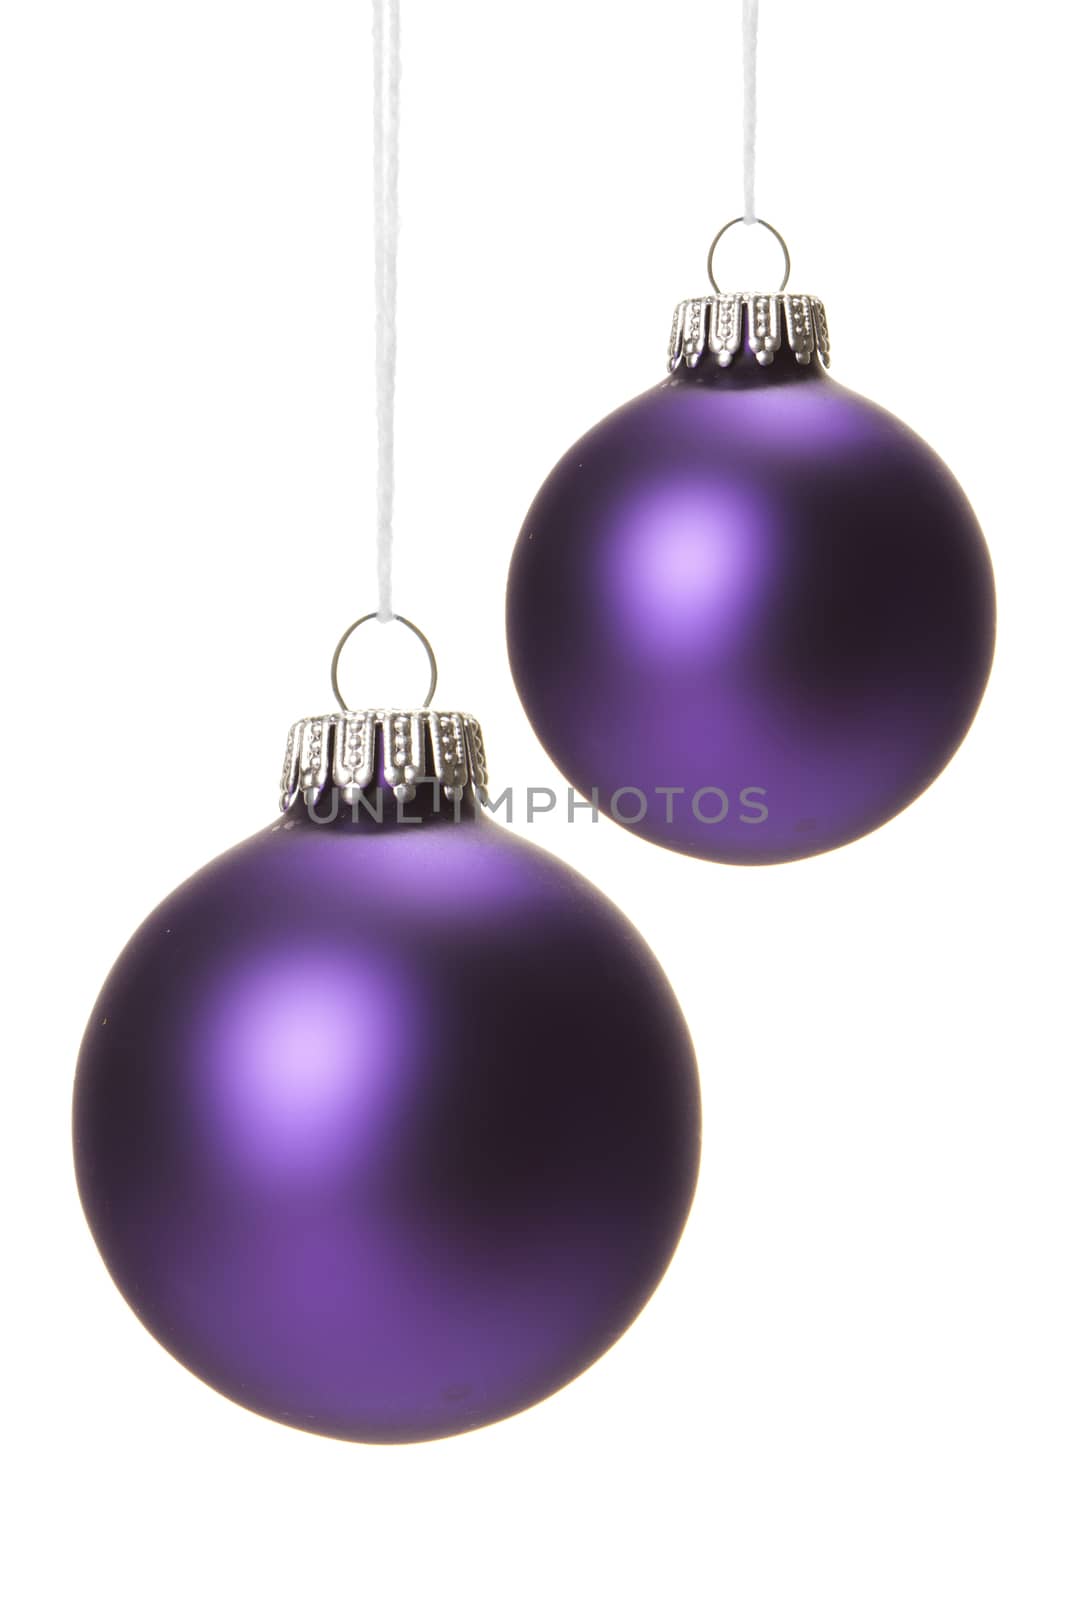 christmas ornament violet by Tomjac1980